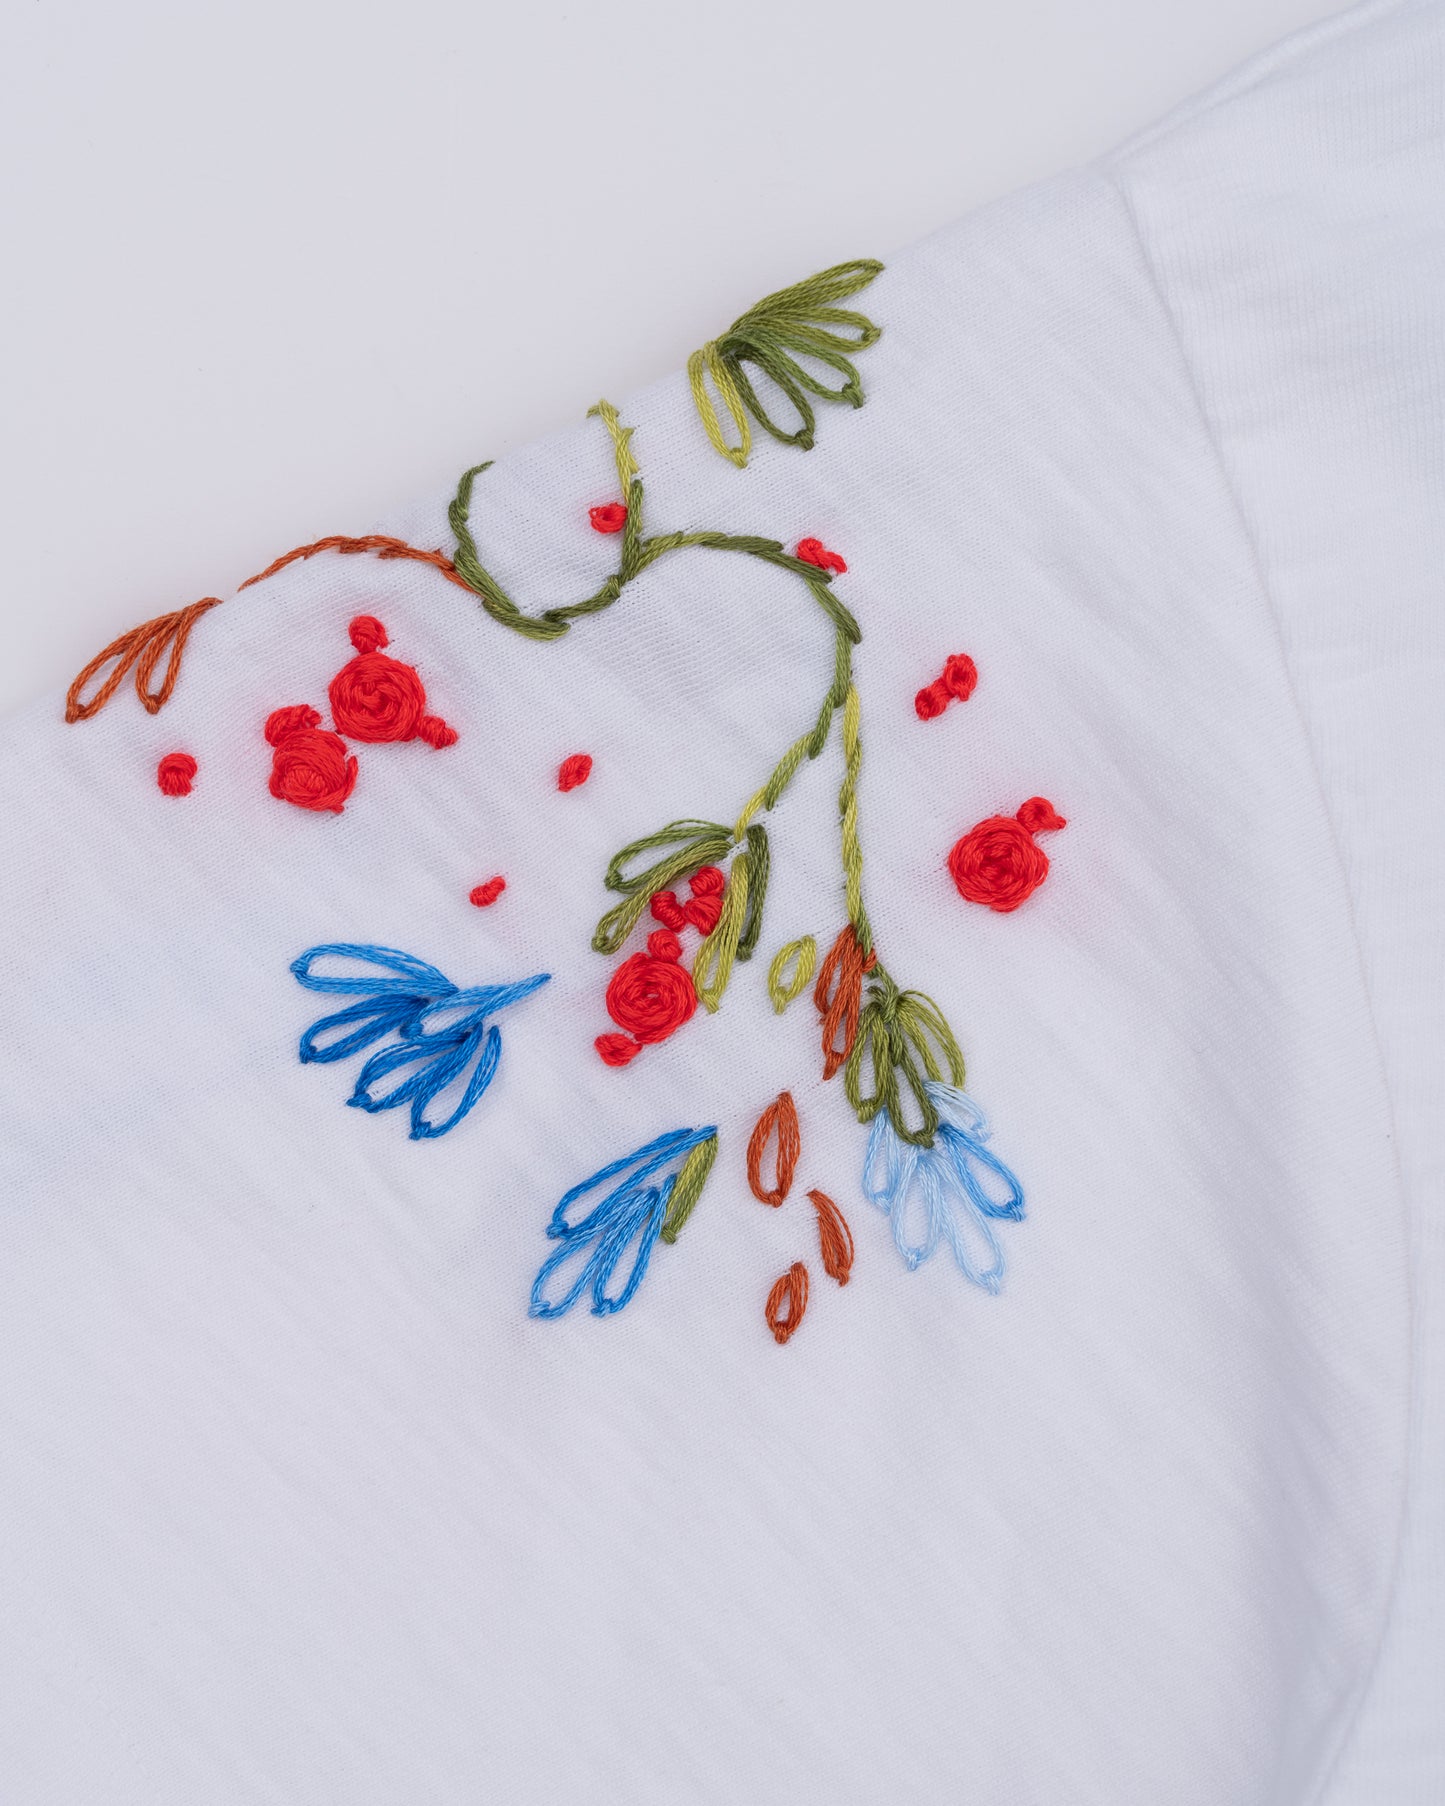 Journey Tee - White Floral Sleeve